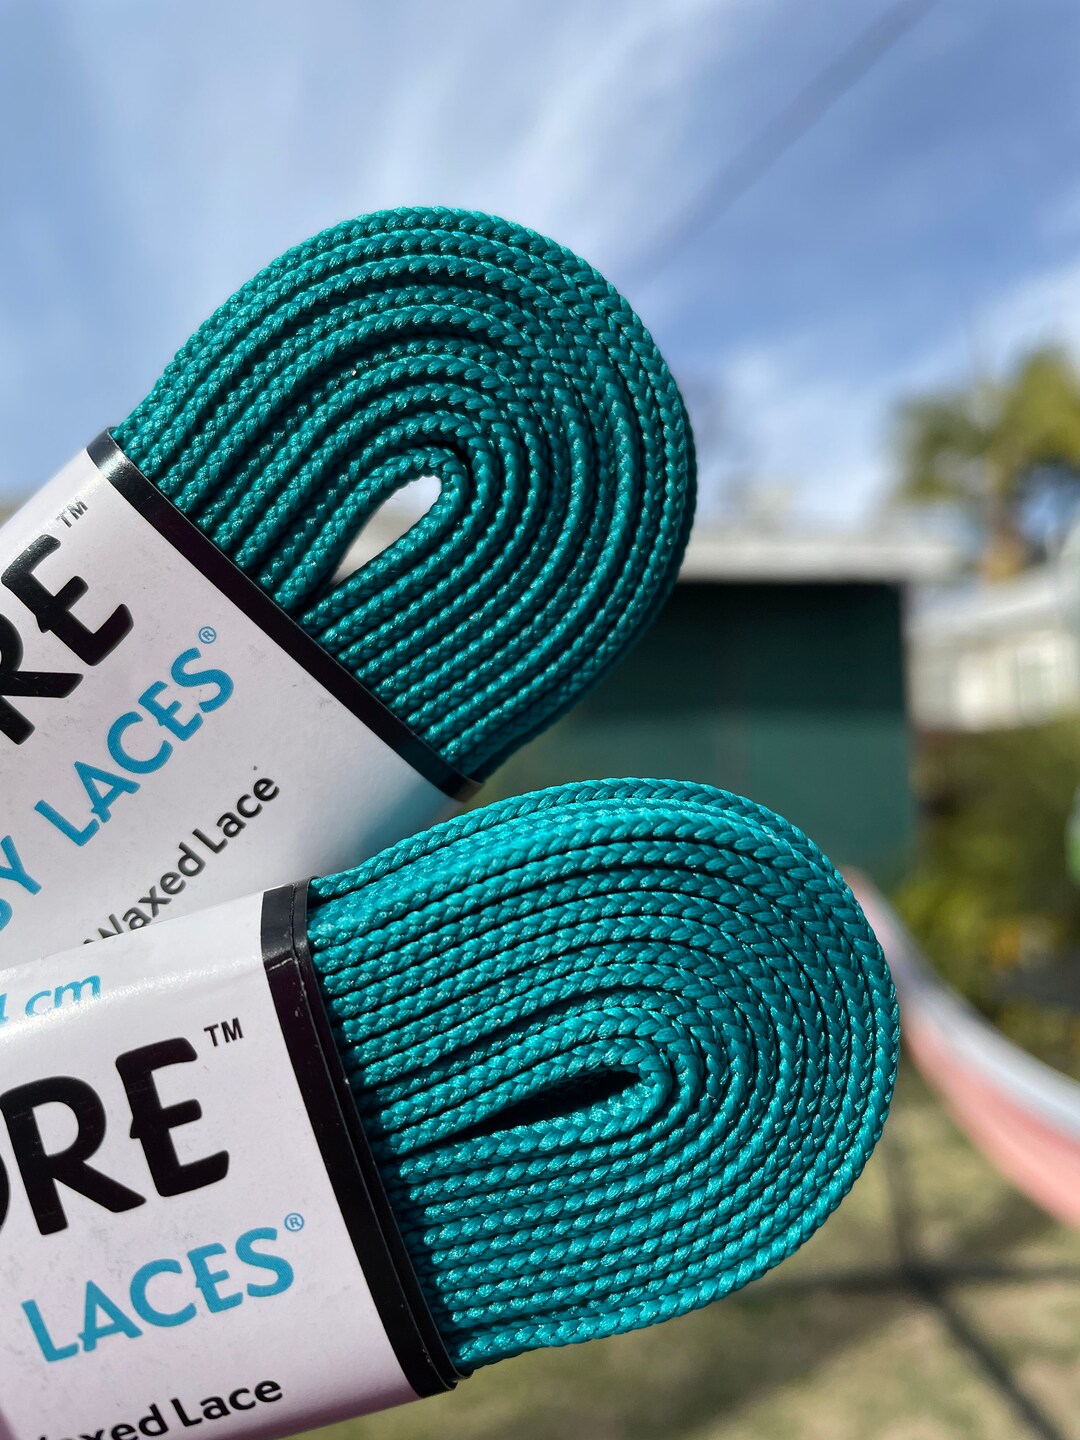 Teal 96 Inch Roller Skate CORE Laces Narrow 6mm Pair - Etsy